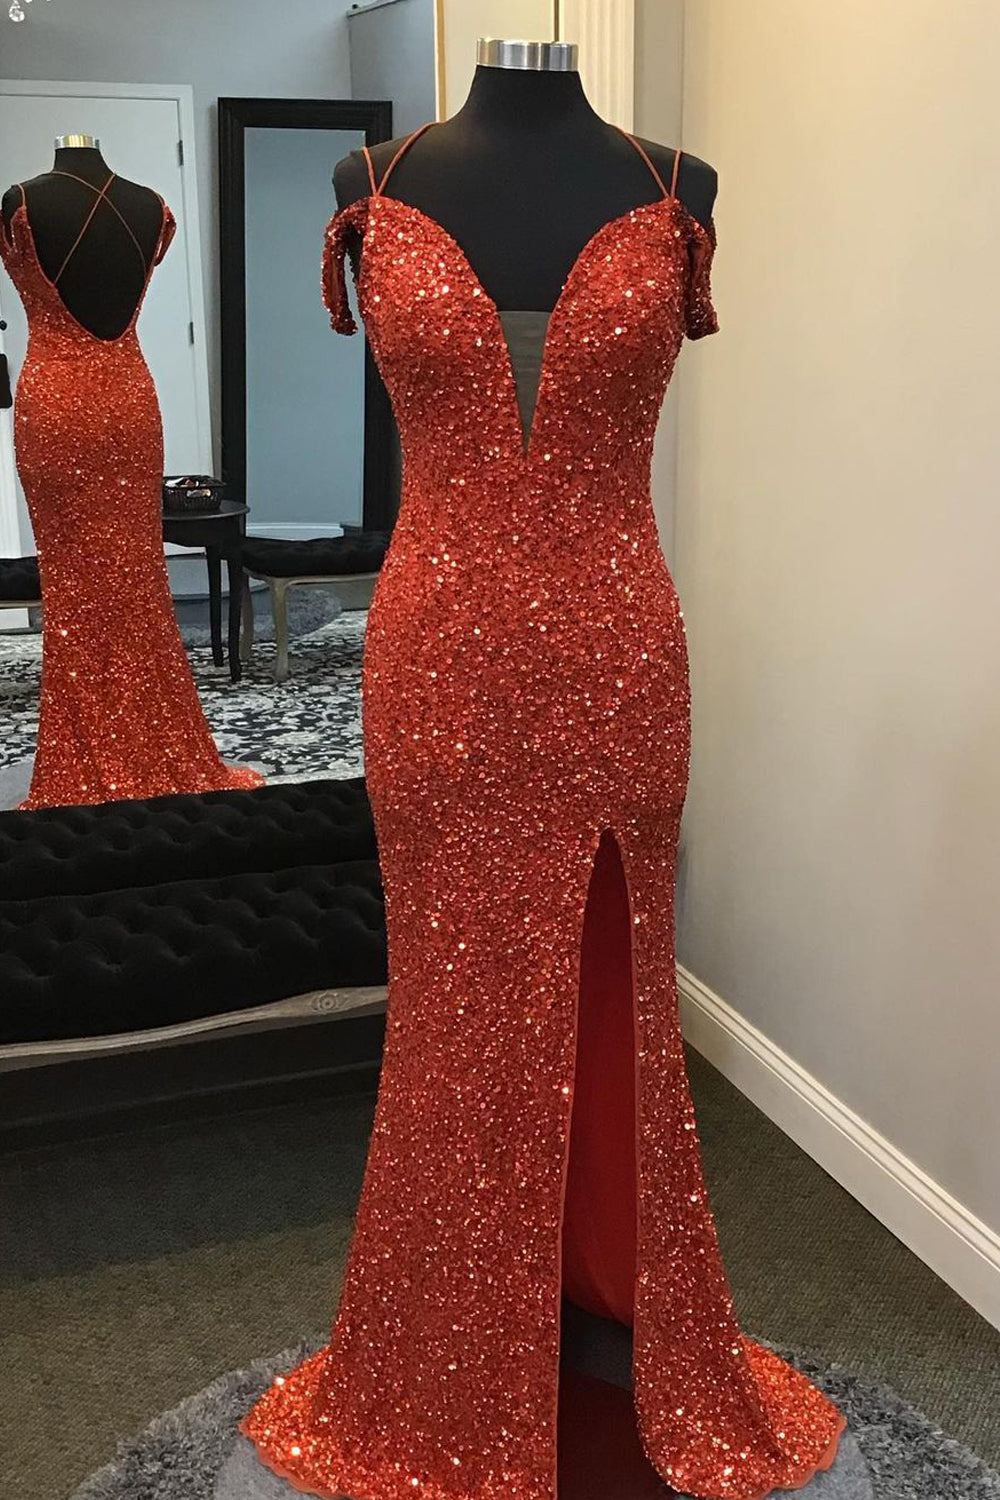 Orange Sparkly Spaghetti Straps Sequins Long Corset Prom Dress with Slit Gowns, Bridesmaids Dress Styles Long